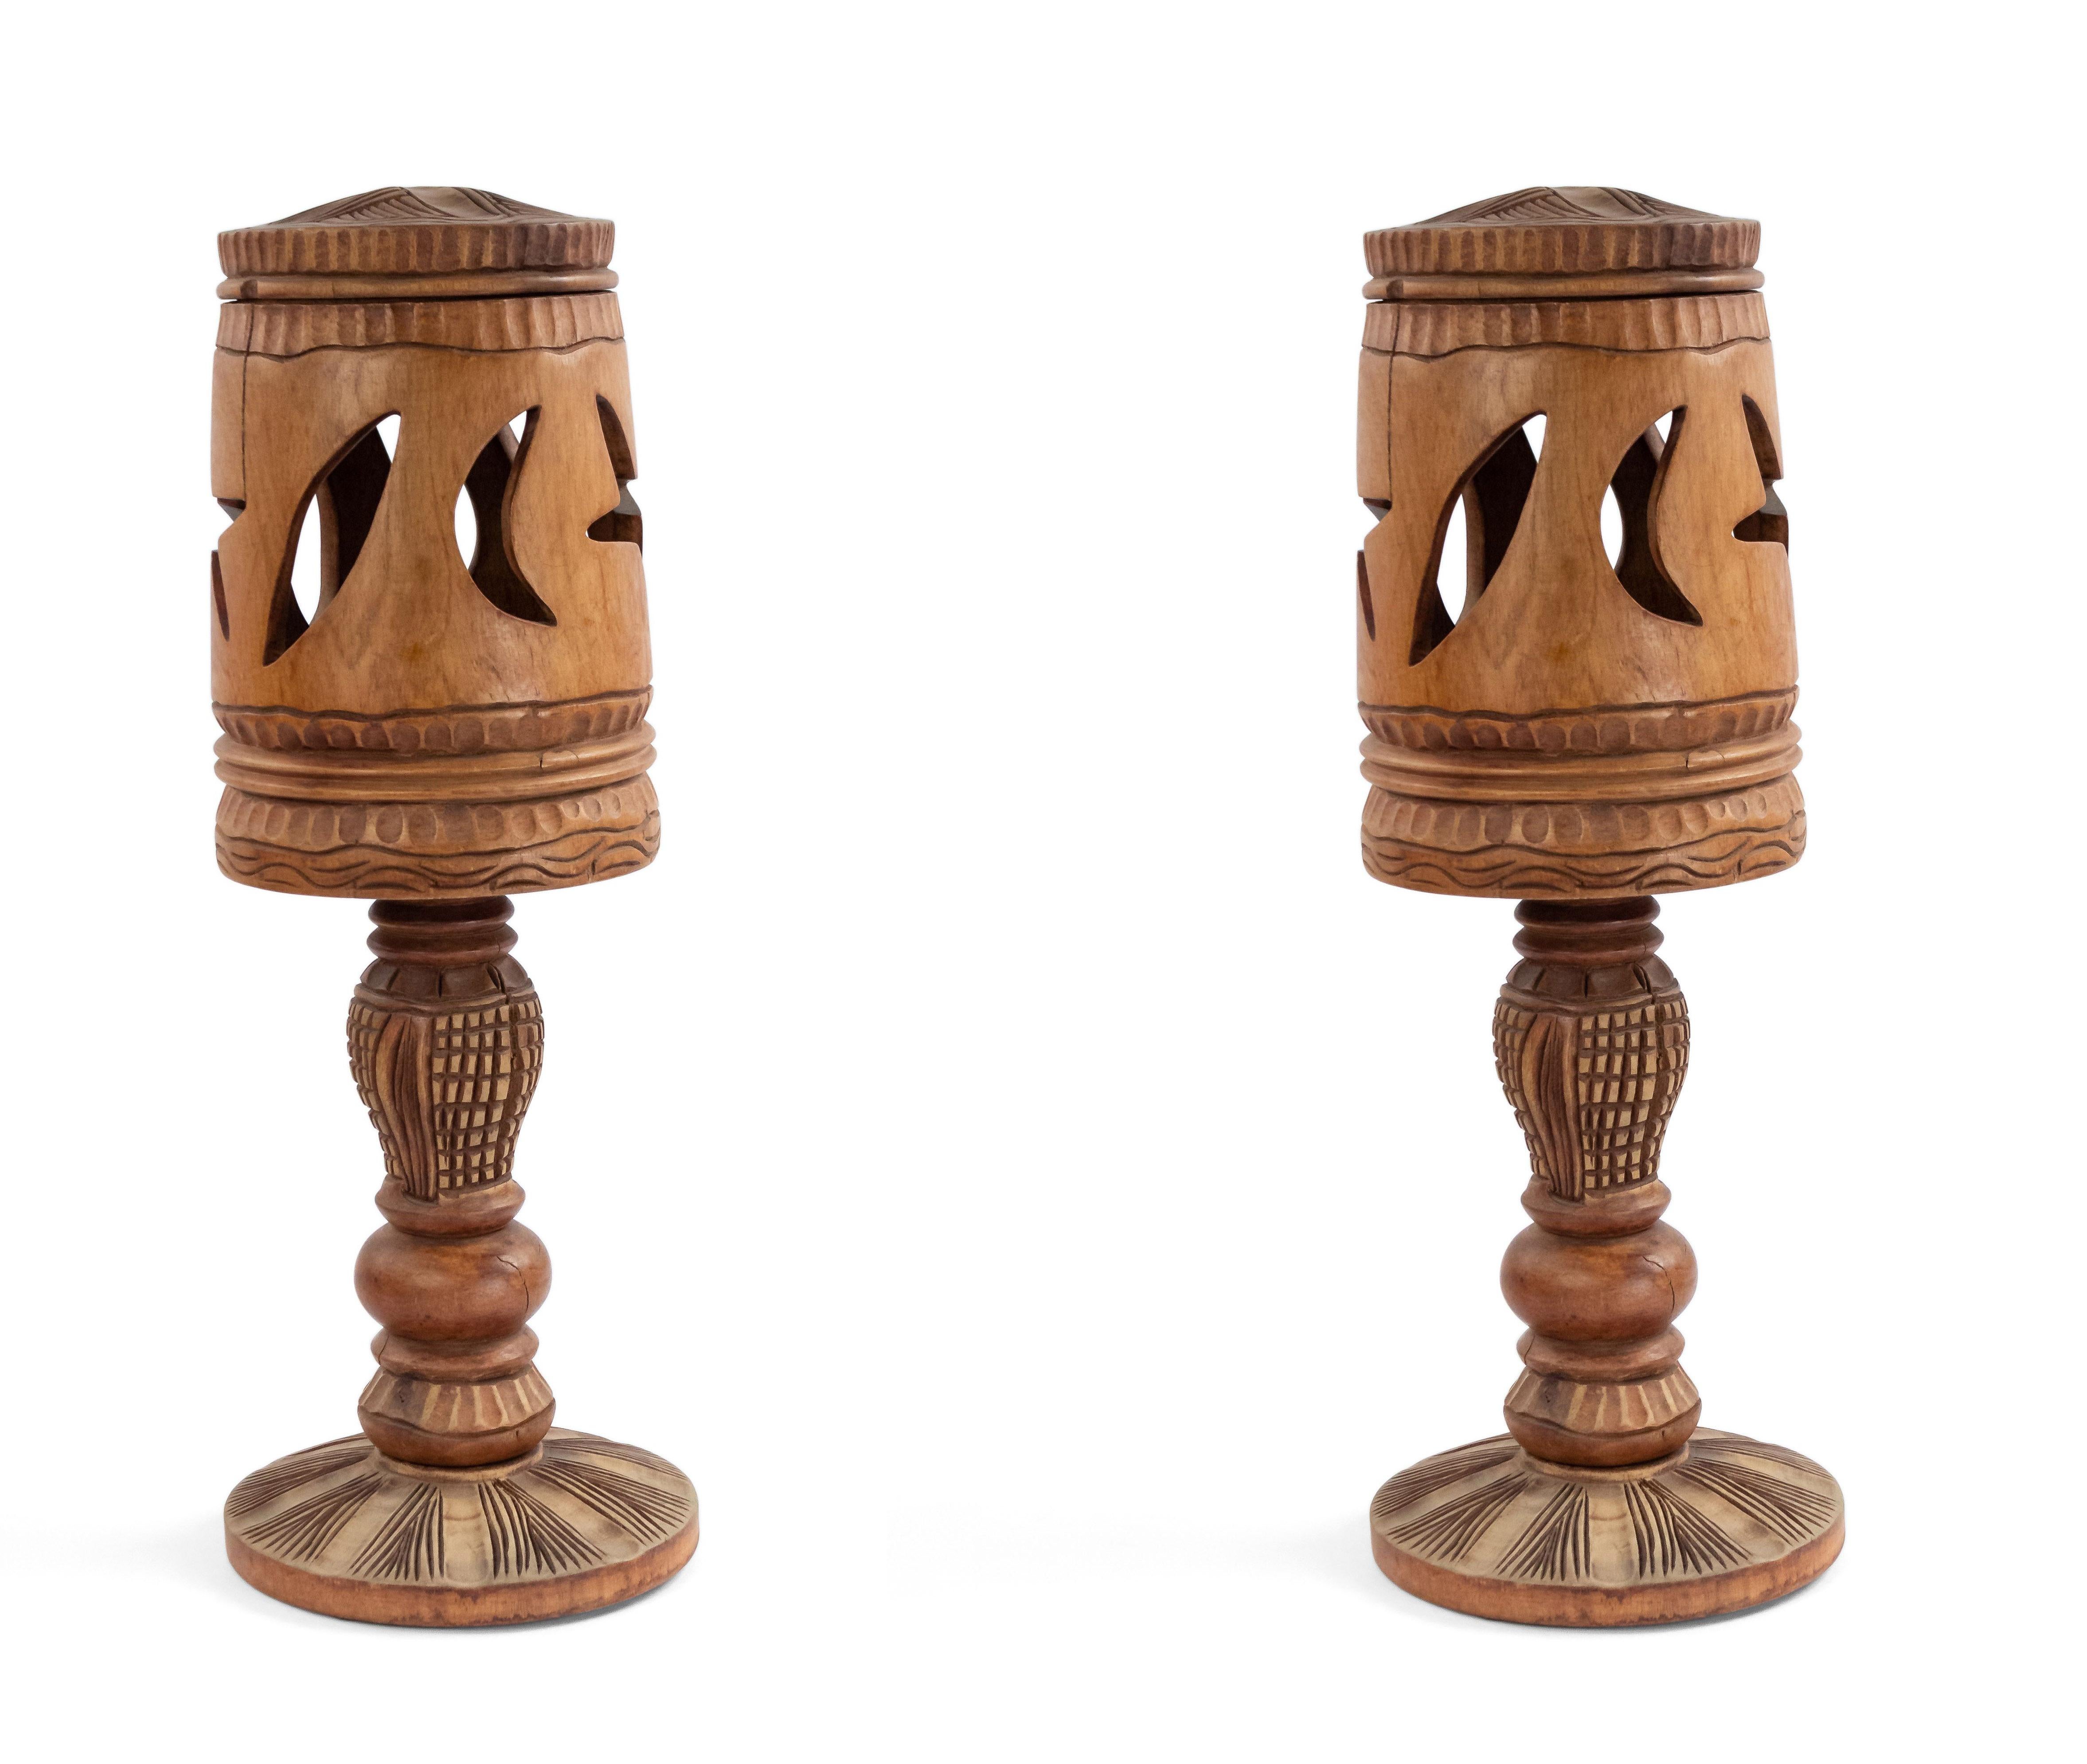 Pair of Rustic American Adirondack style (1930s possibly Haitian) light wood (three section) table lamps with carved moon and star cut-out design shade under a top cover.
 